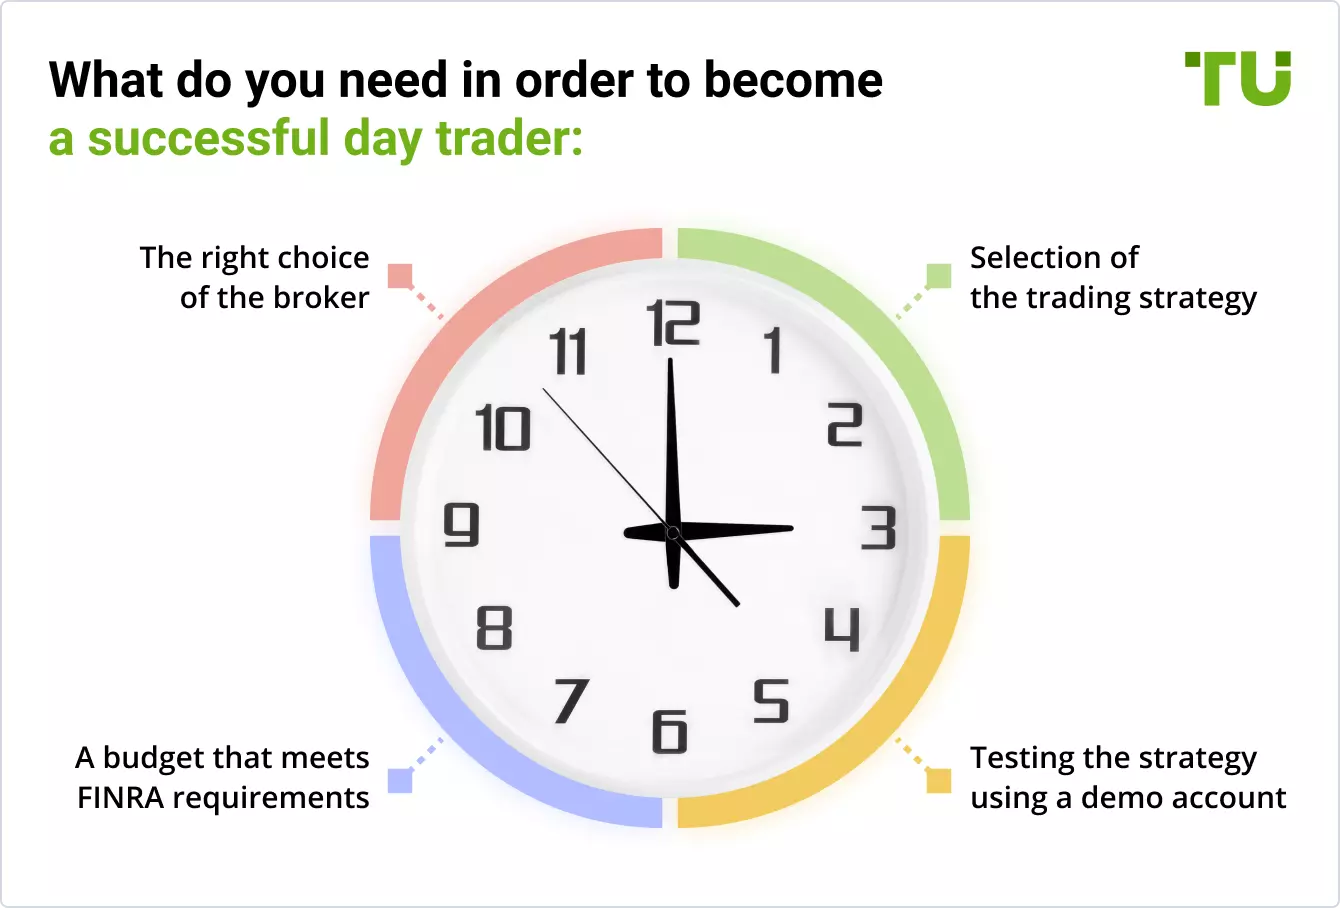 What do you need in order to become a successful day trader